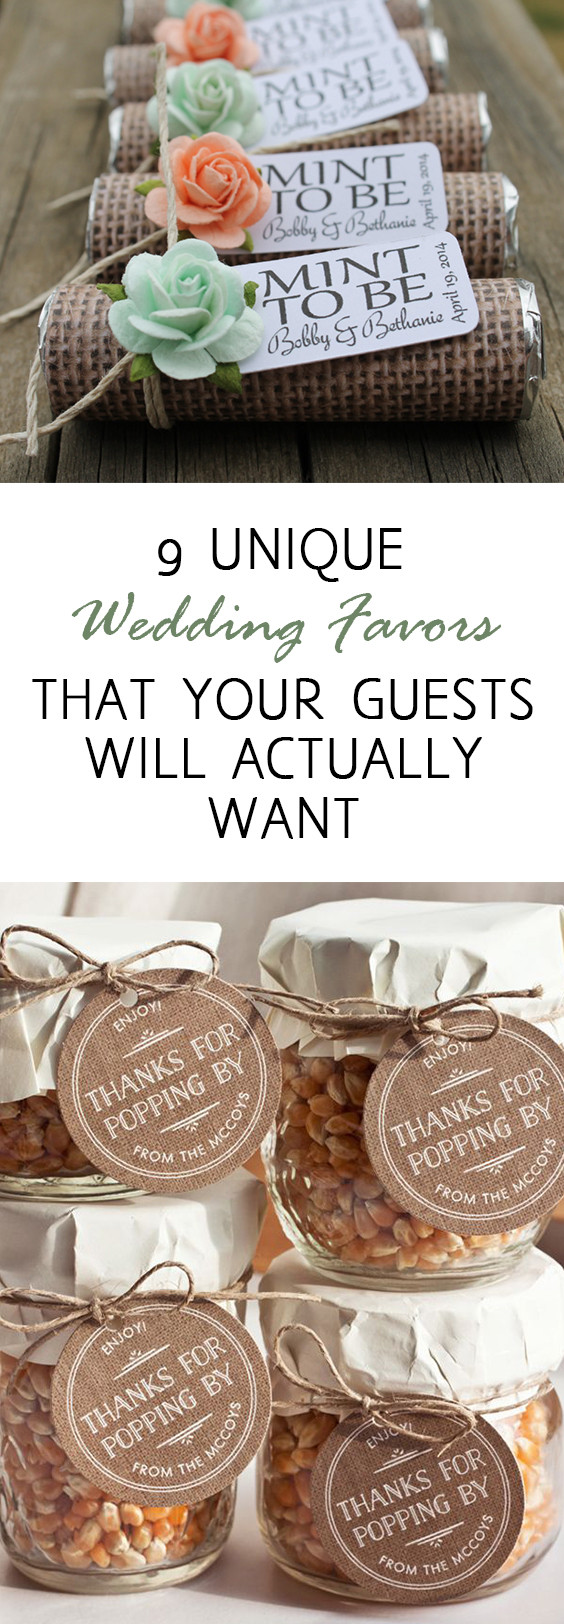 Wedding Favor Ideas
 9 Unique Wedding Favors that Your Guests Will Actually